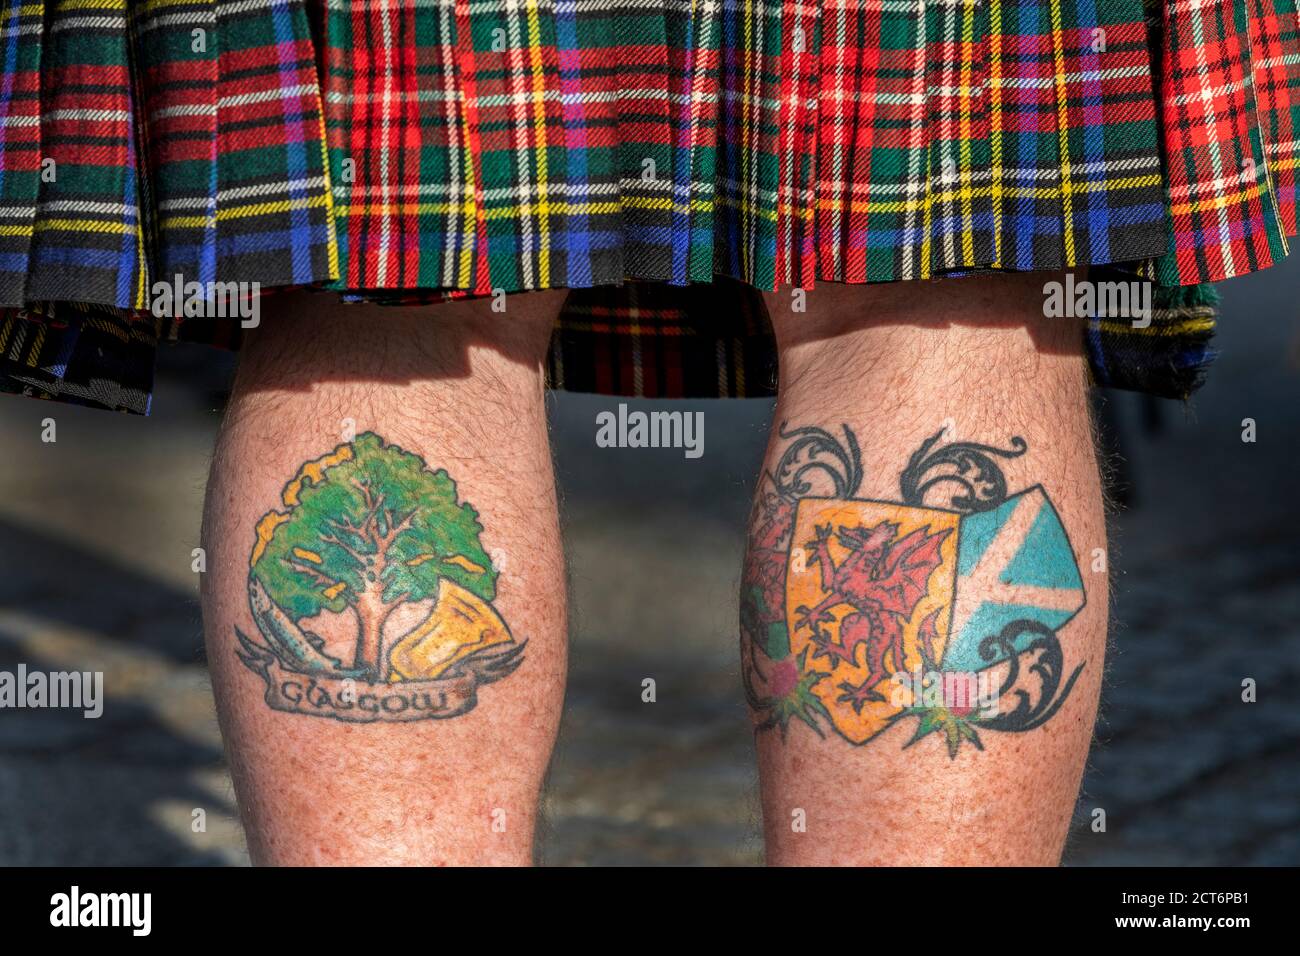 Man wearing a tartan kilt with tattoos on his legs showing Glasgow and support for Scottish independence, Taken at an independence rally, Glasgow, Stock Photo